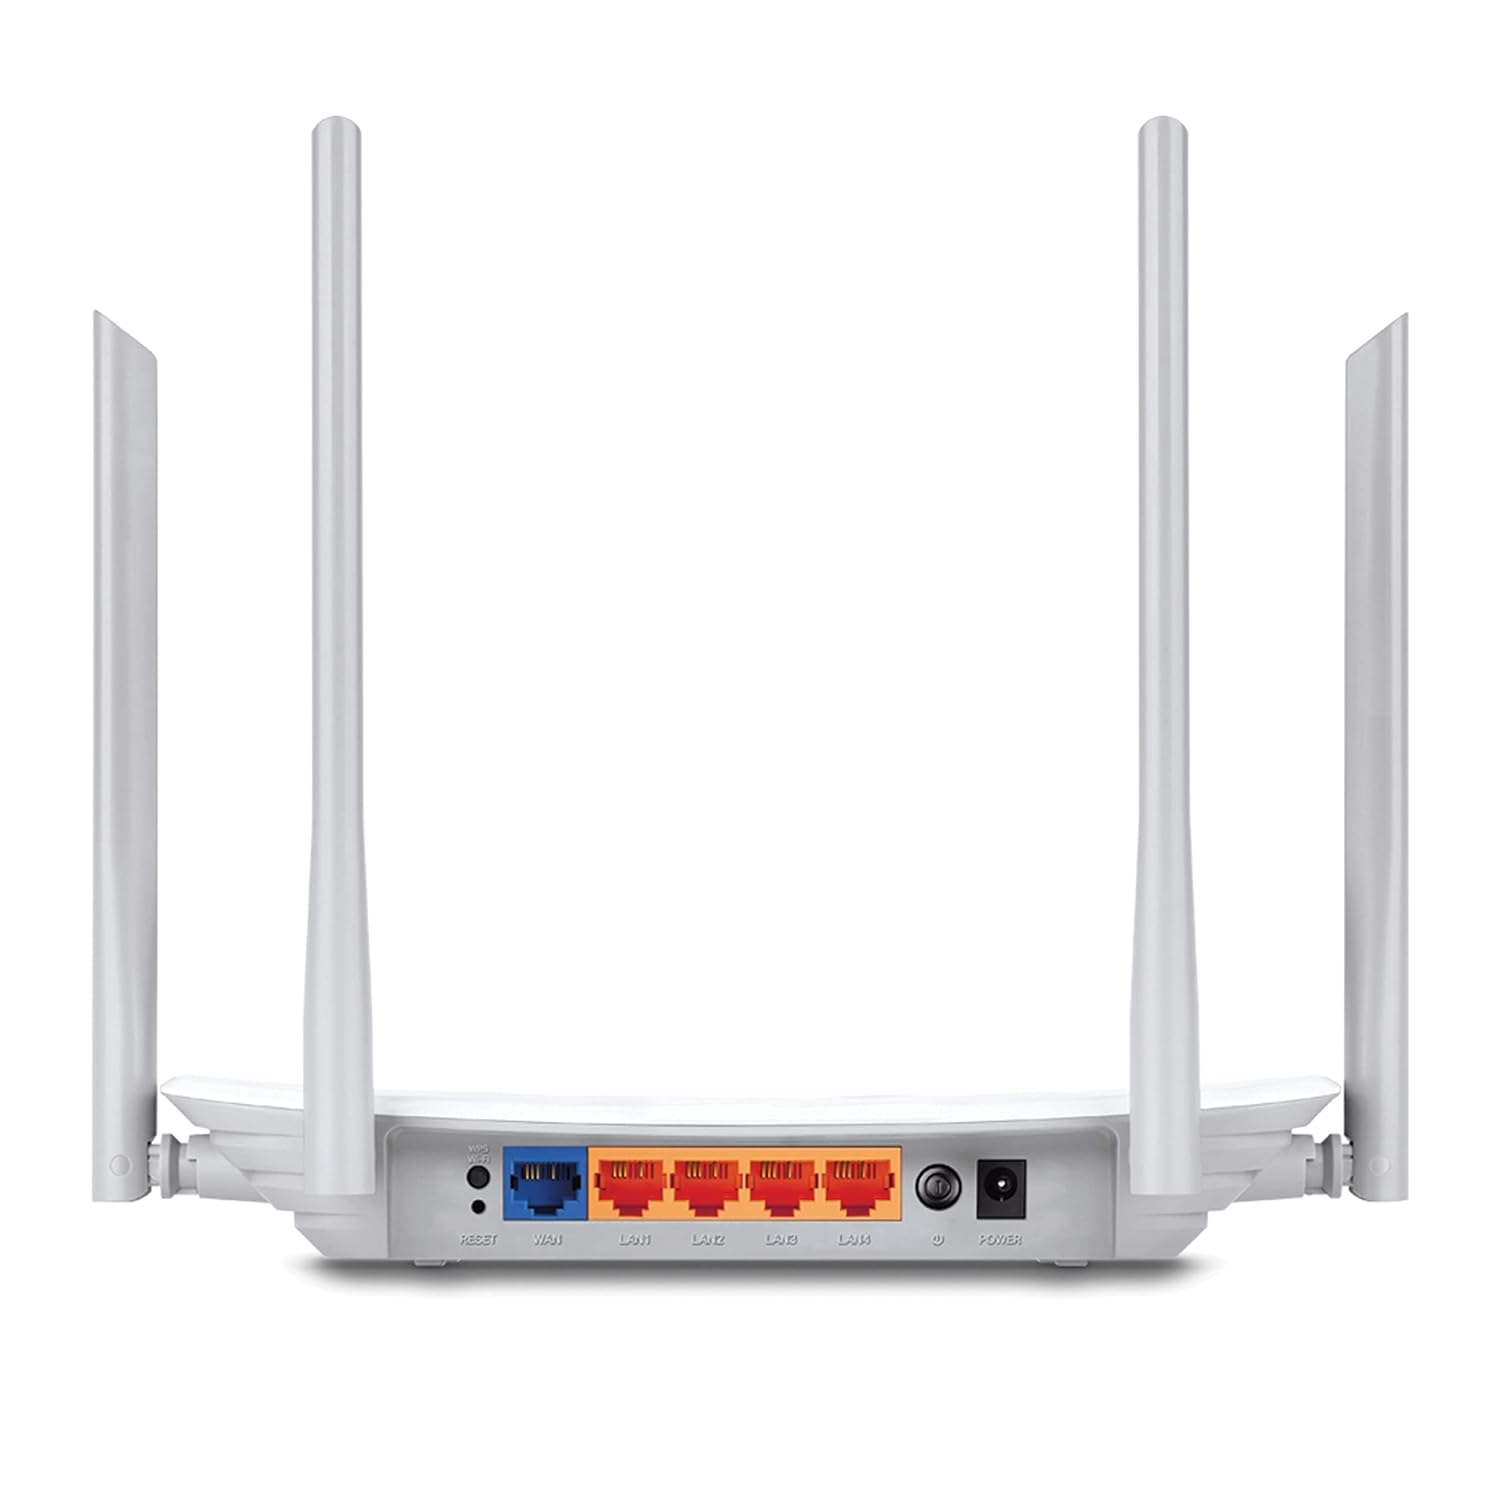 TP-LINK AC1200 Wireless Dual Band Router - White